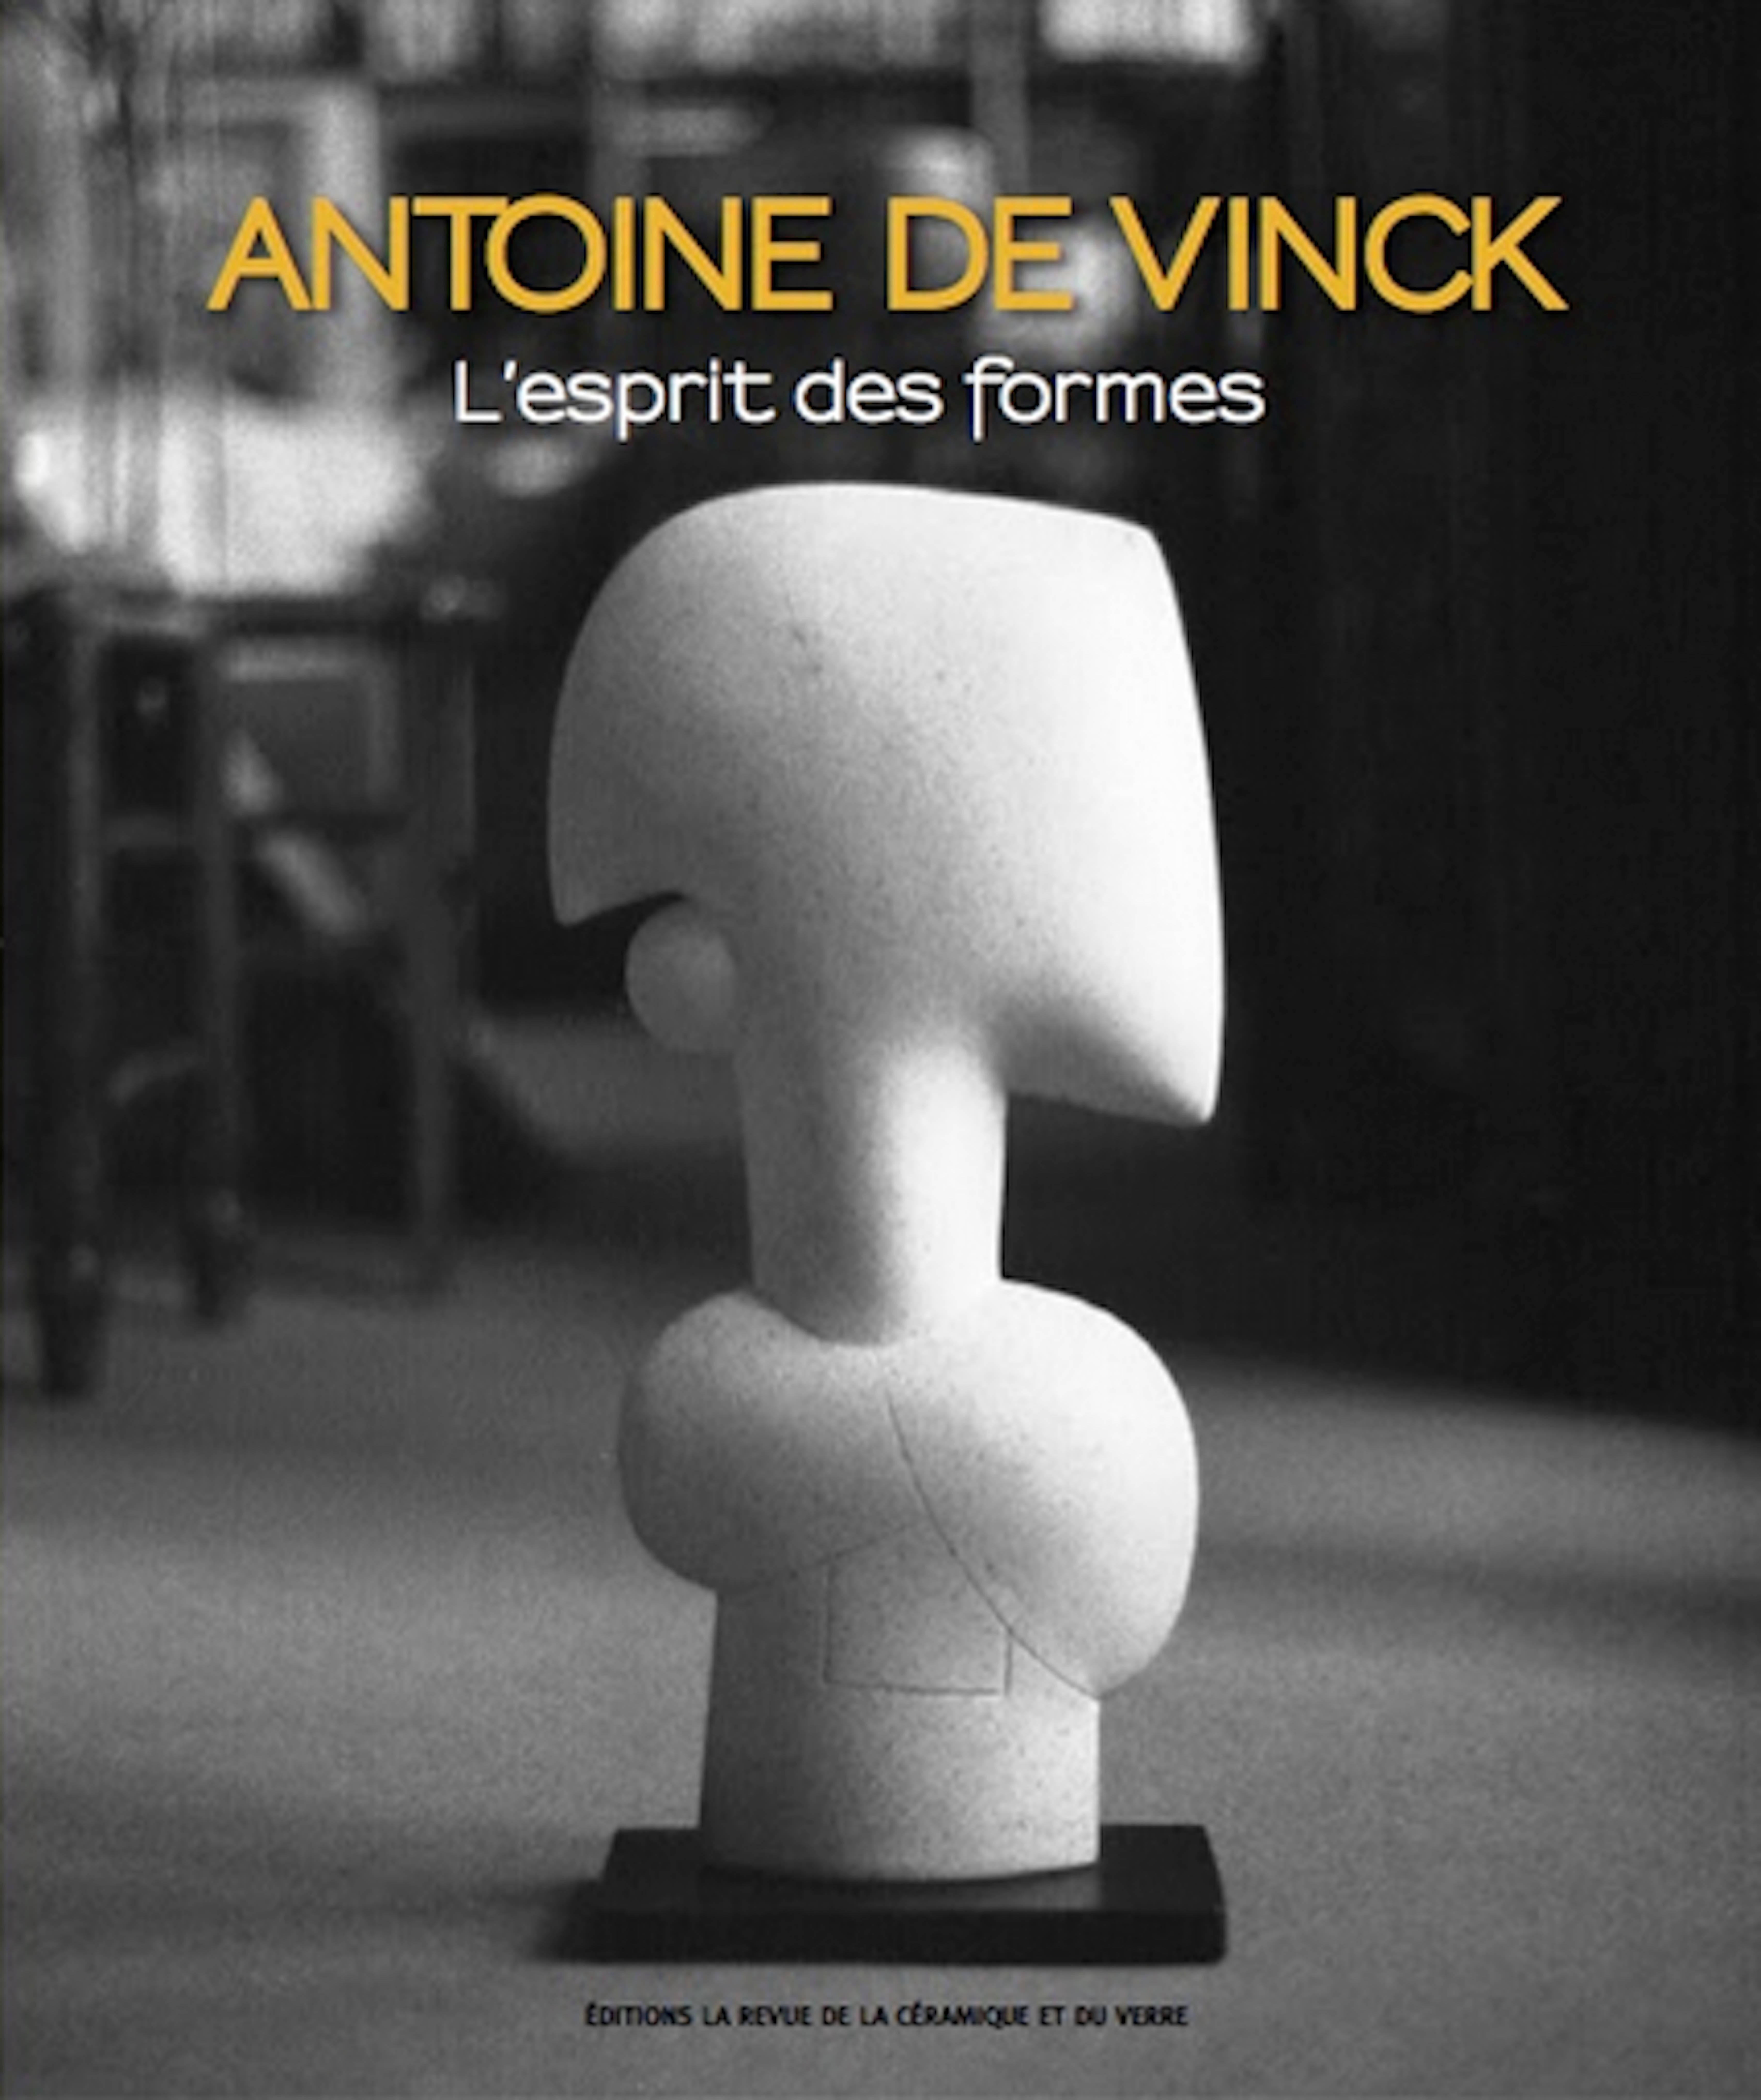 Monograph on the work of Antoine de Vinck, Editions de la Revue de la Ce´ramique et du Verre. This book is intended to accompany the retrospective exhibition which prepares the Center Keramis in 2016, thirty years after that of the royal Museum of